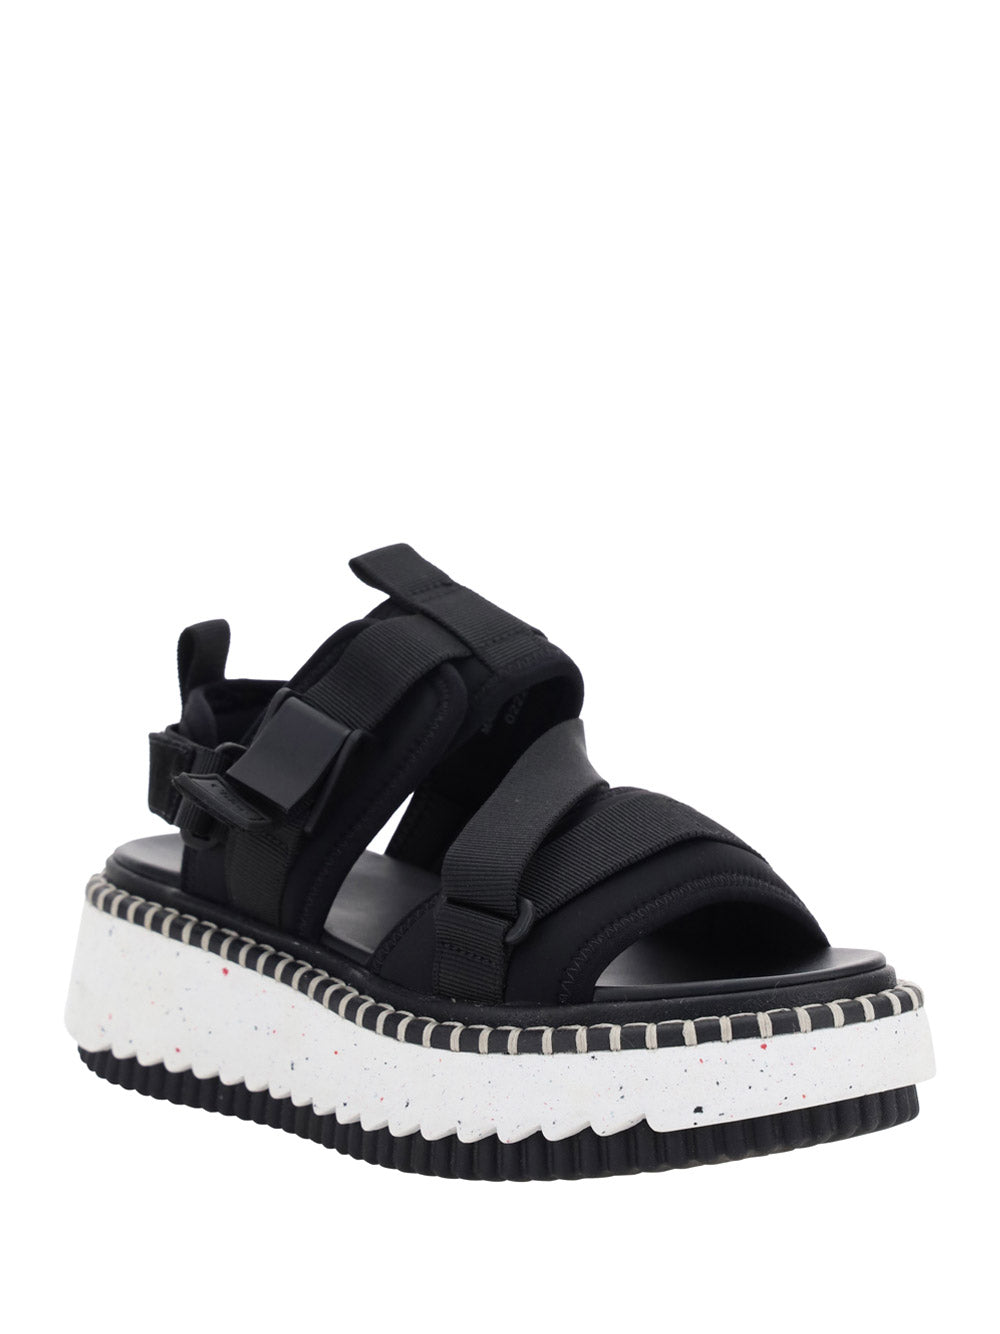 Lilli Sporty Flat Sandal In Recycled Textile - Black